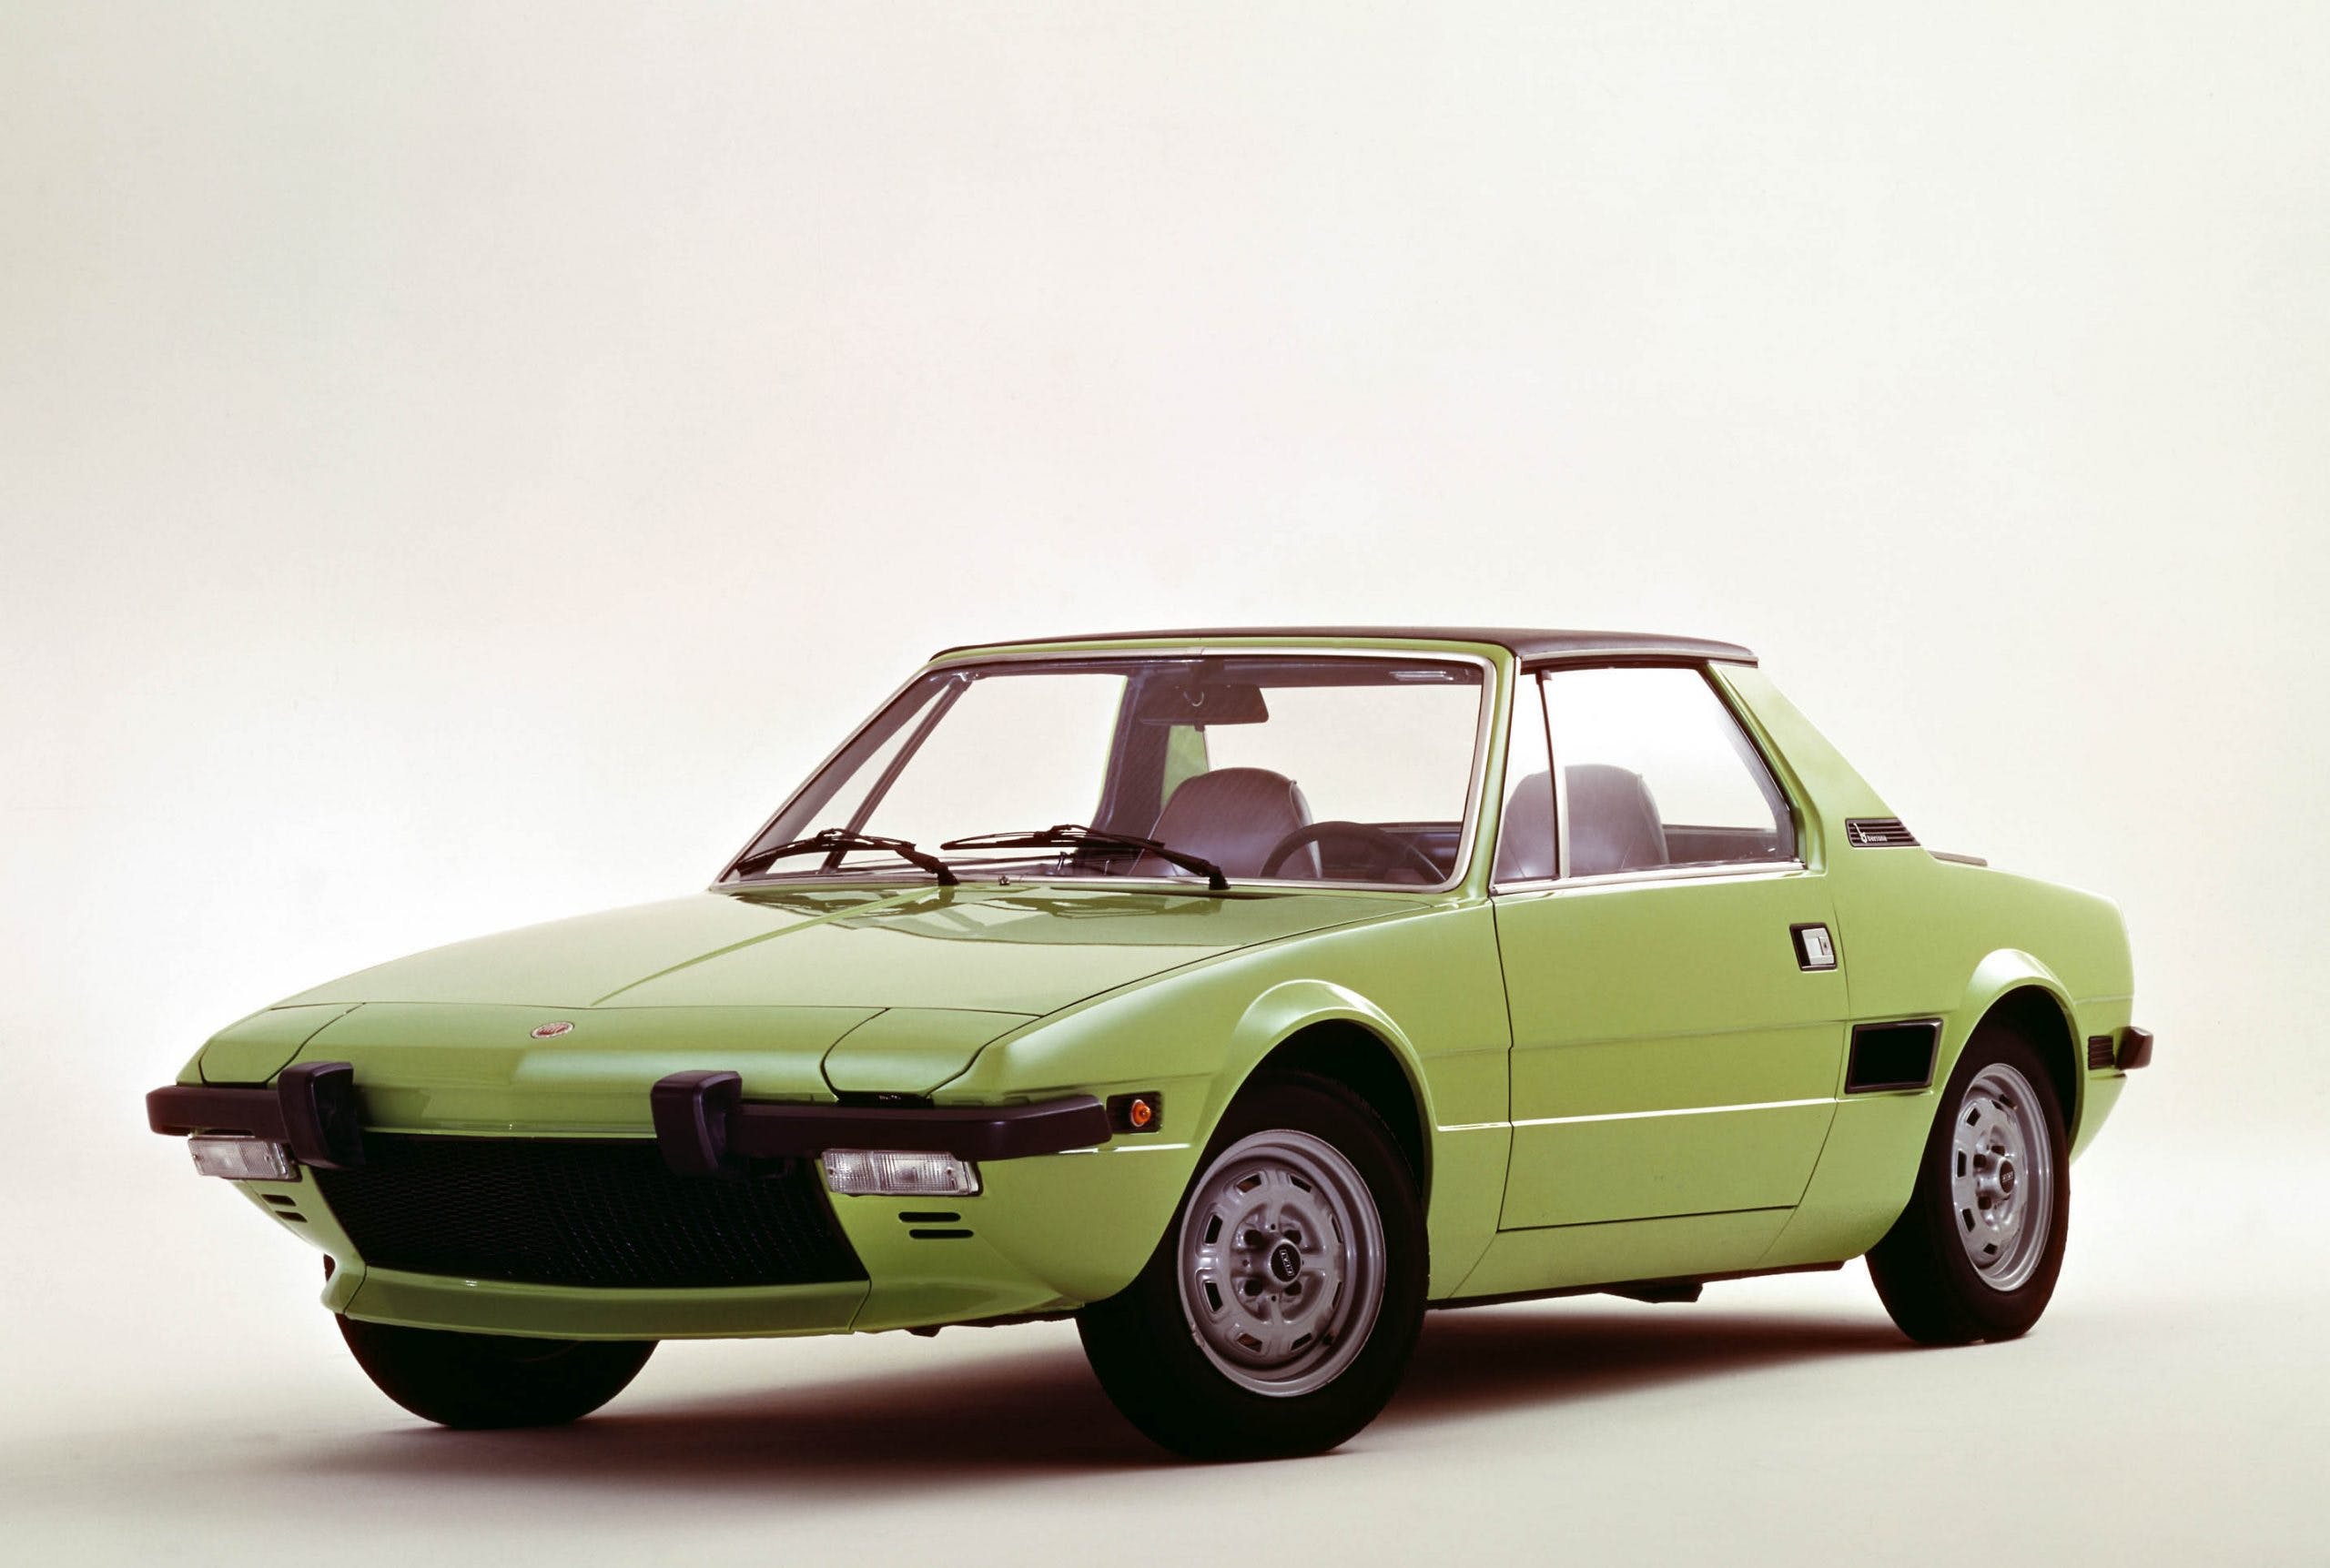 1972 birthed a new angle for Italian sports cars